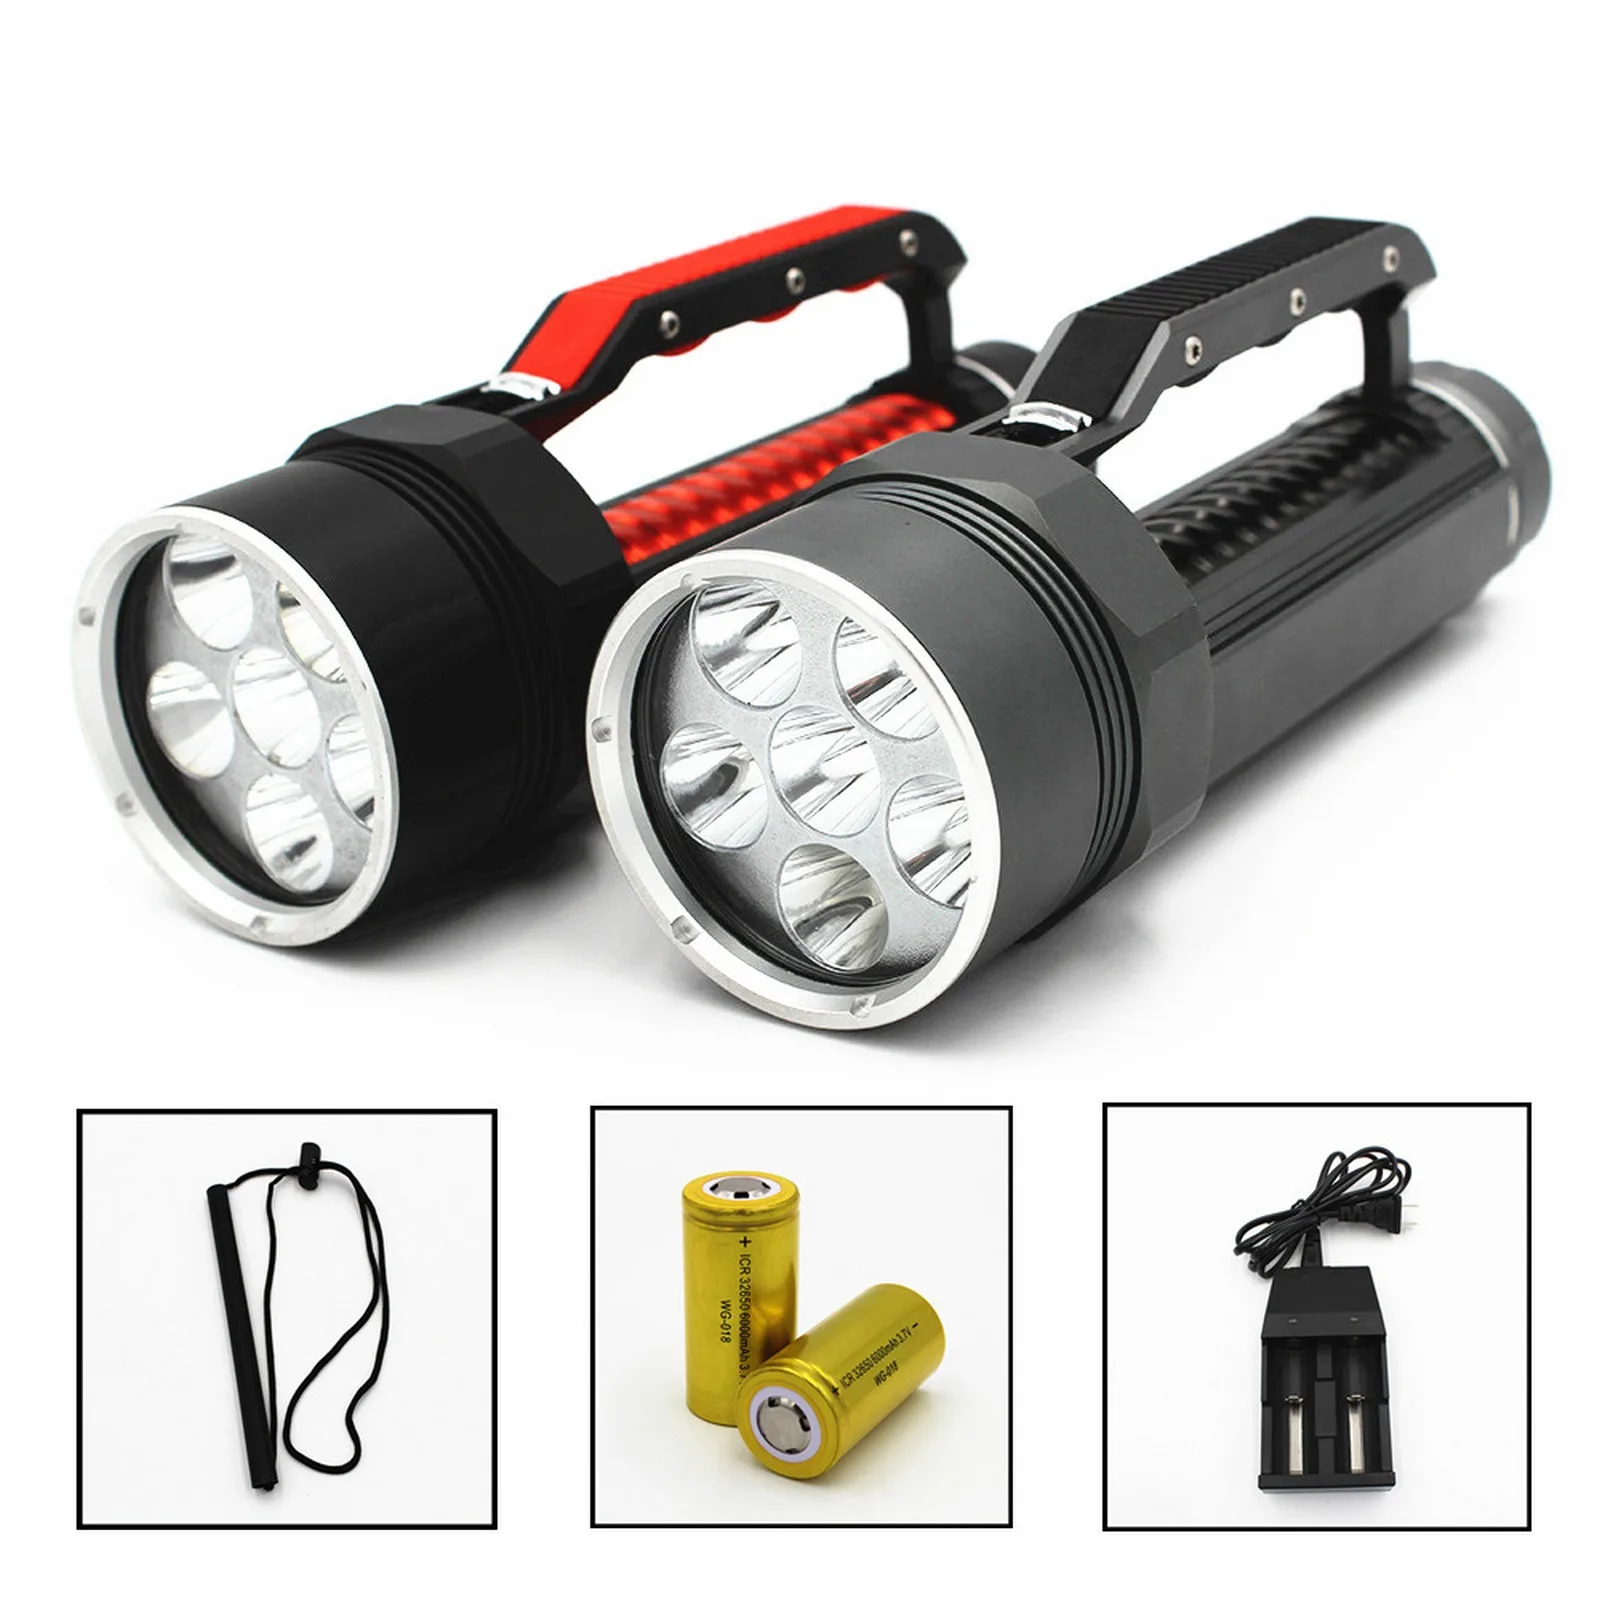 Underwater Flashlight L2 Super Bright 32650 Battery Diving Torch Searchlight Miner's Lamp Work Light IPX8 Portable 6 Lights